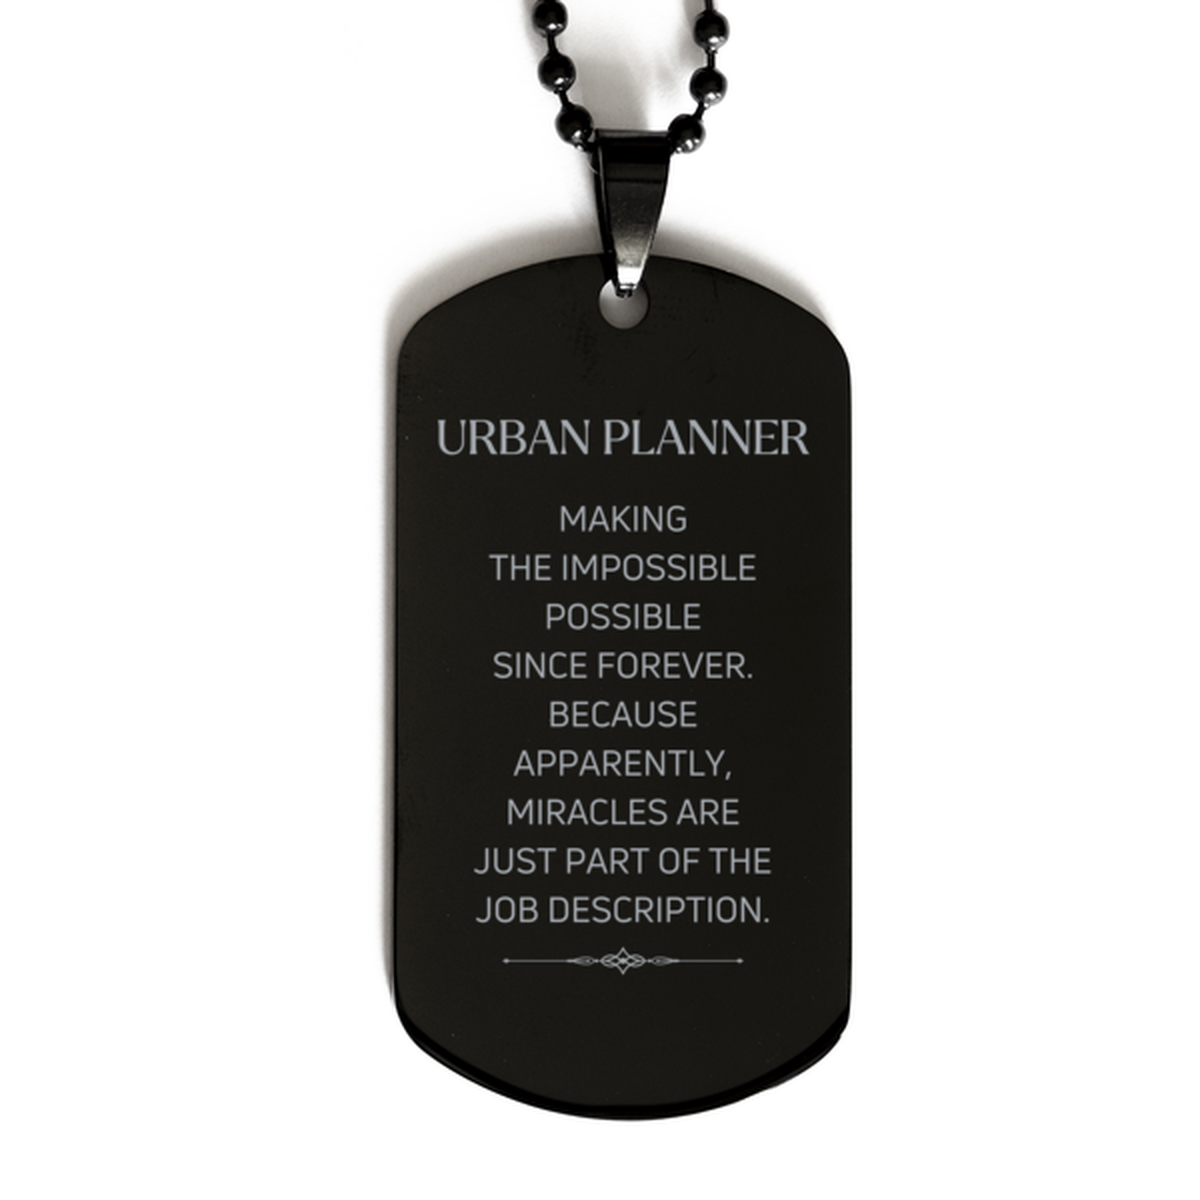 Funny Urban Planner Gifts, Miracles are just part of the job description, Inspirational Birthday Black Dog Tag For Urban Planner, Men, Women, Coworkers, Friends, Boss